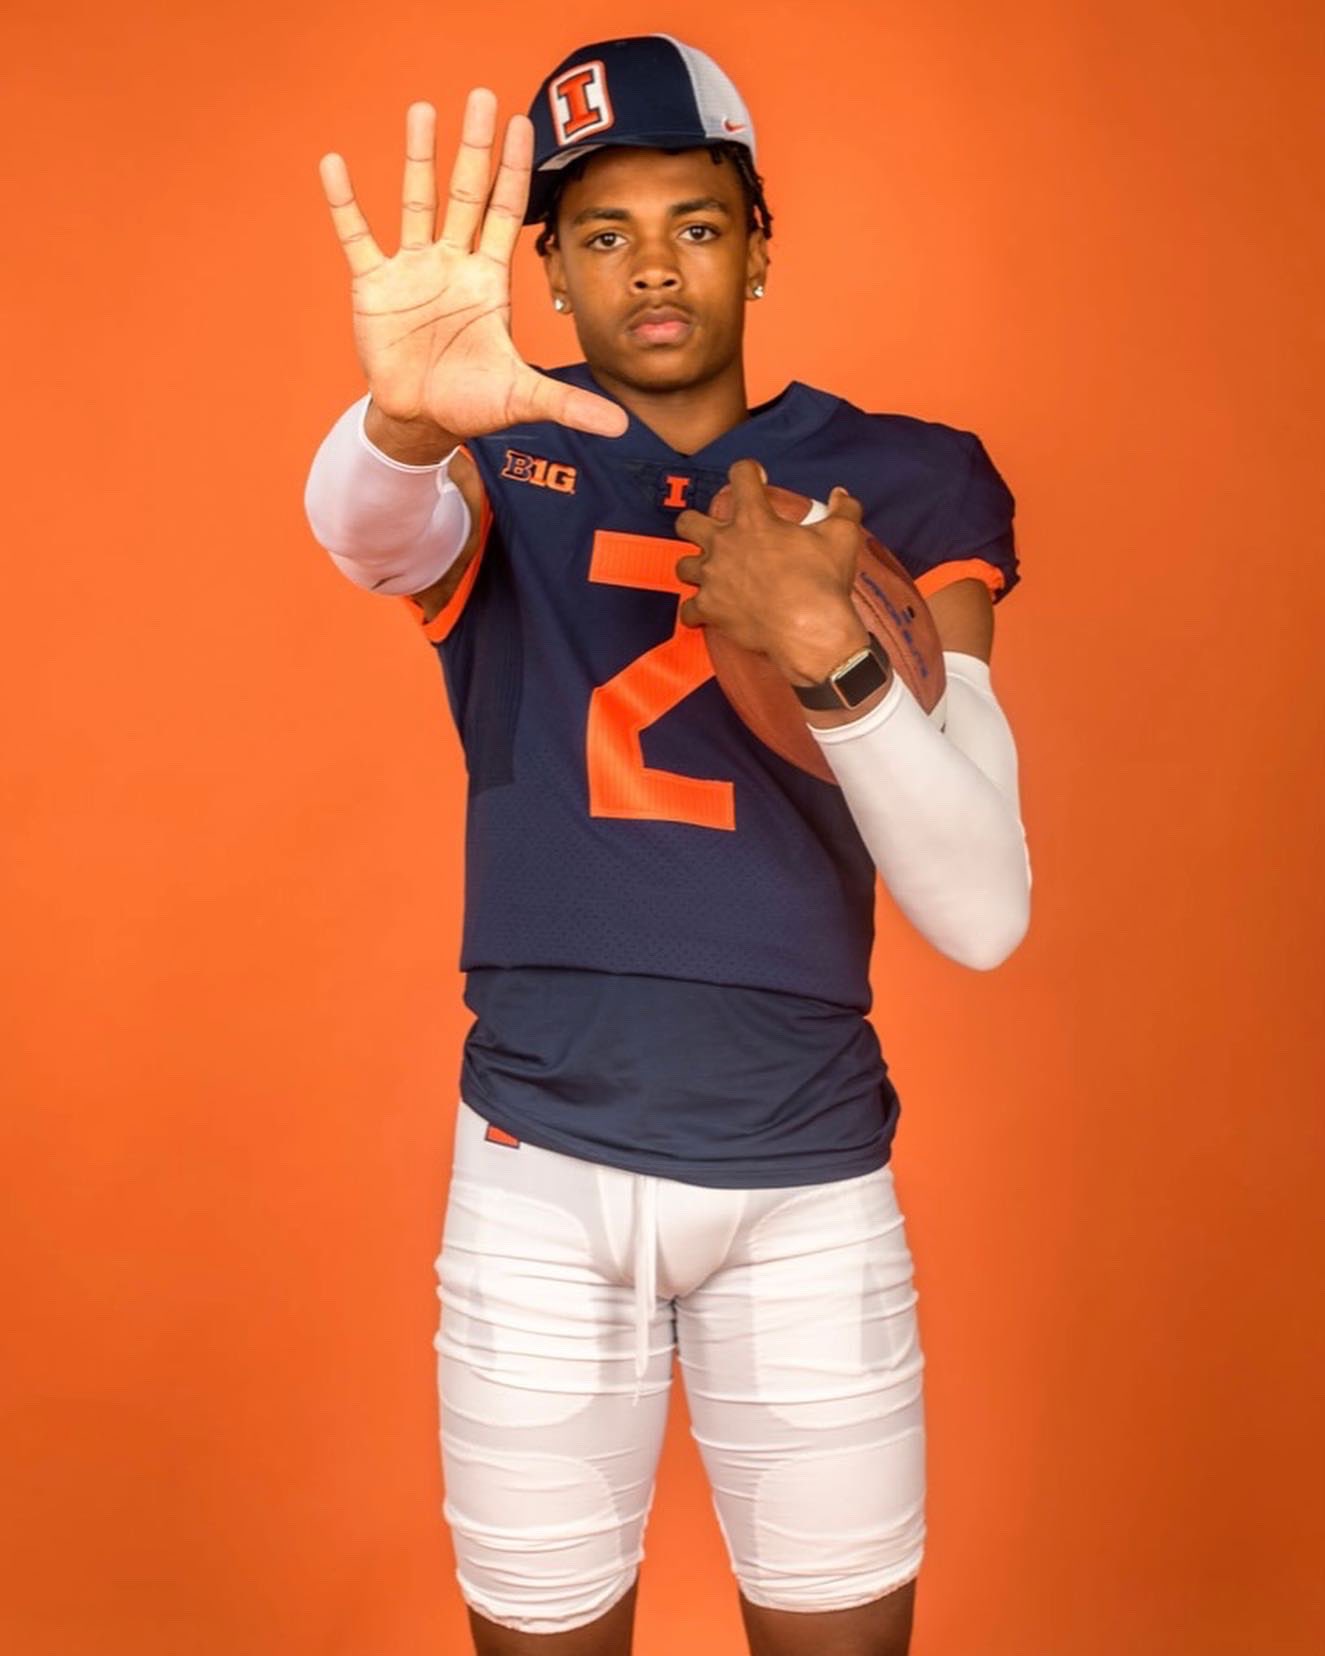 Recruiting: Talented Defensive Back Prospect Makes Second Visit To Illinois Campus This Weekend